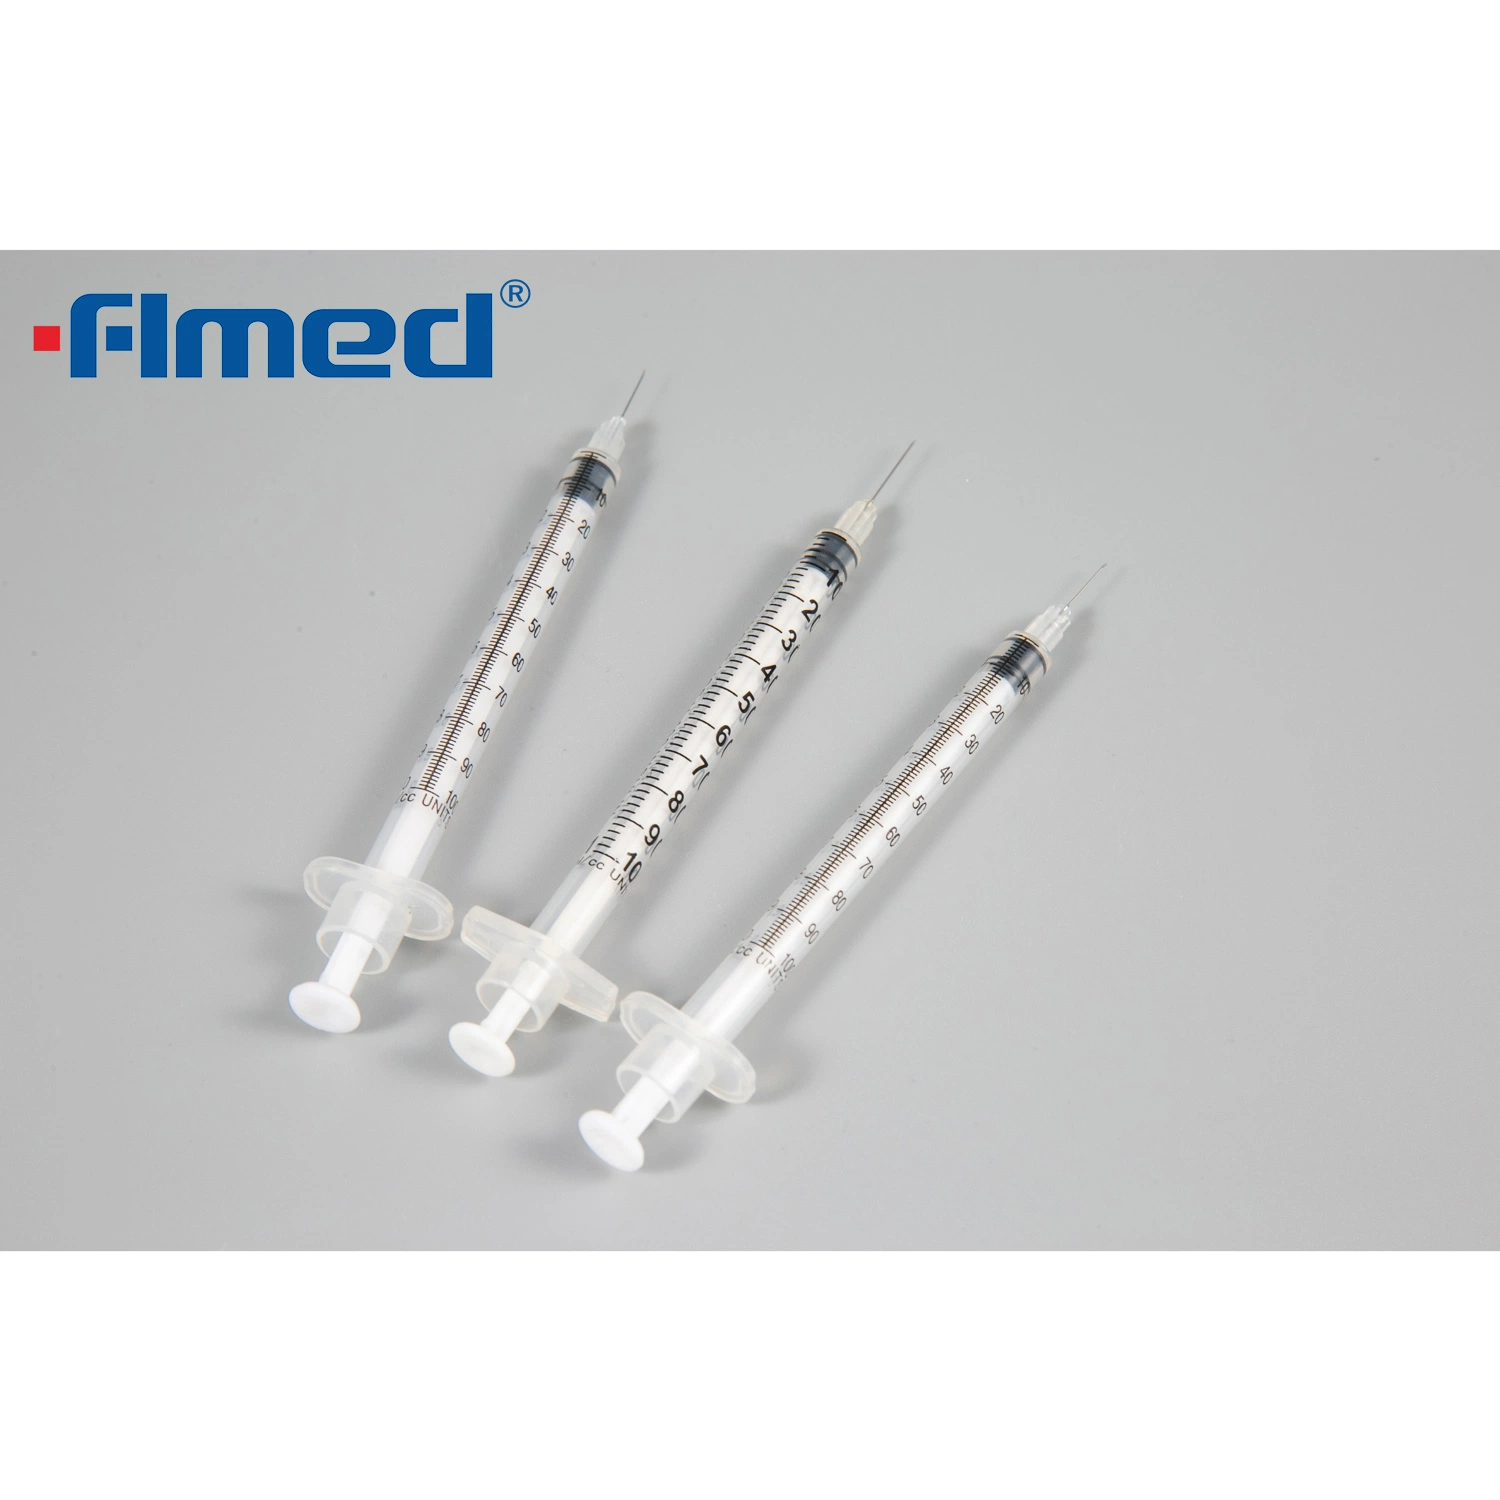 Cheap Price Disposable Medical Syringes with Needle Syringe Luer Lock